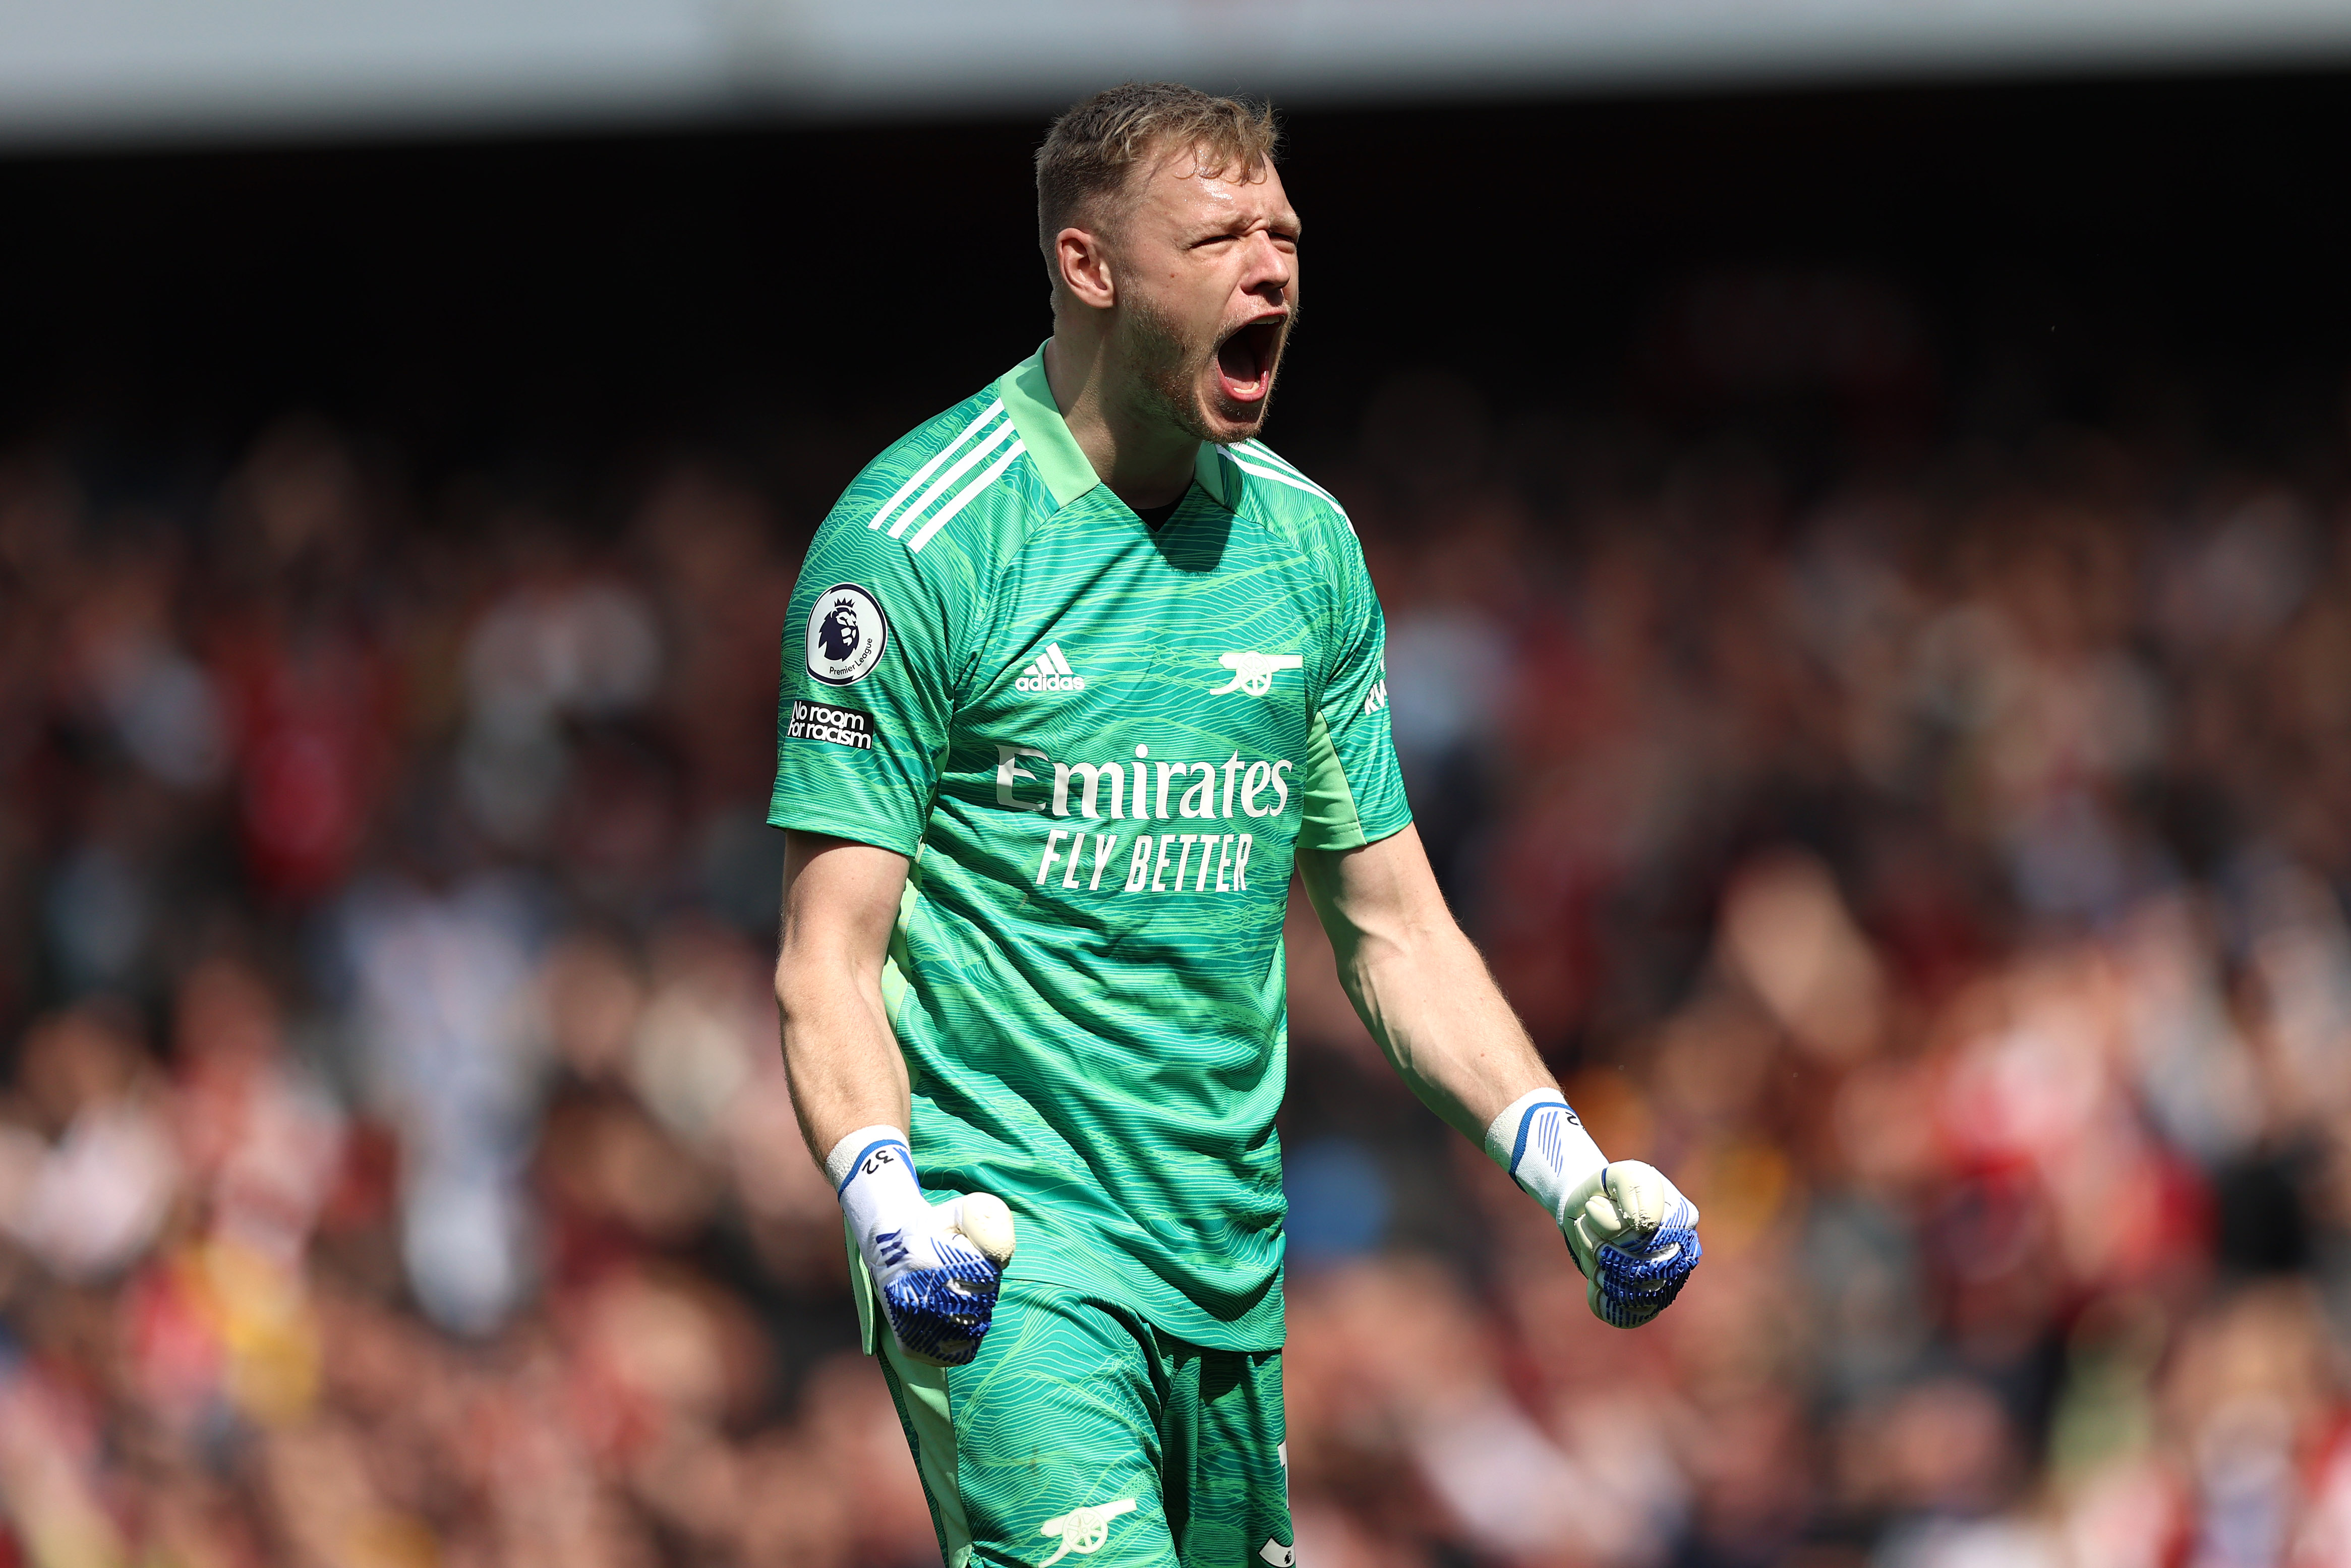 Arsenal keeper Aaron Ramsdale opens up about new contract: 'I'm buzzing' Gunners netminder says